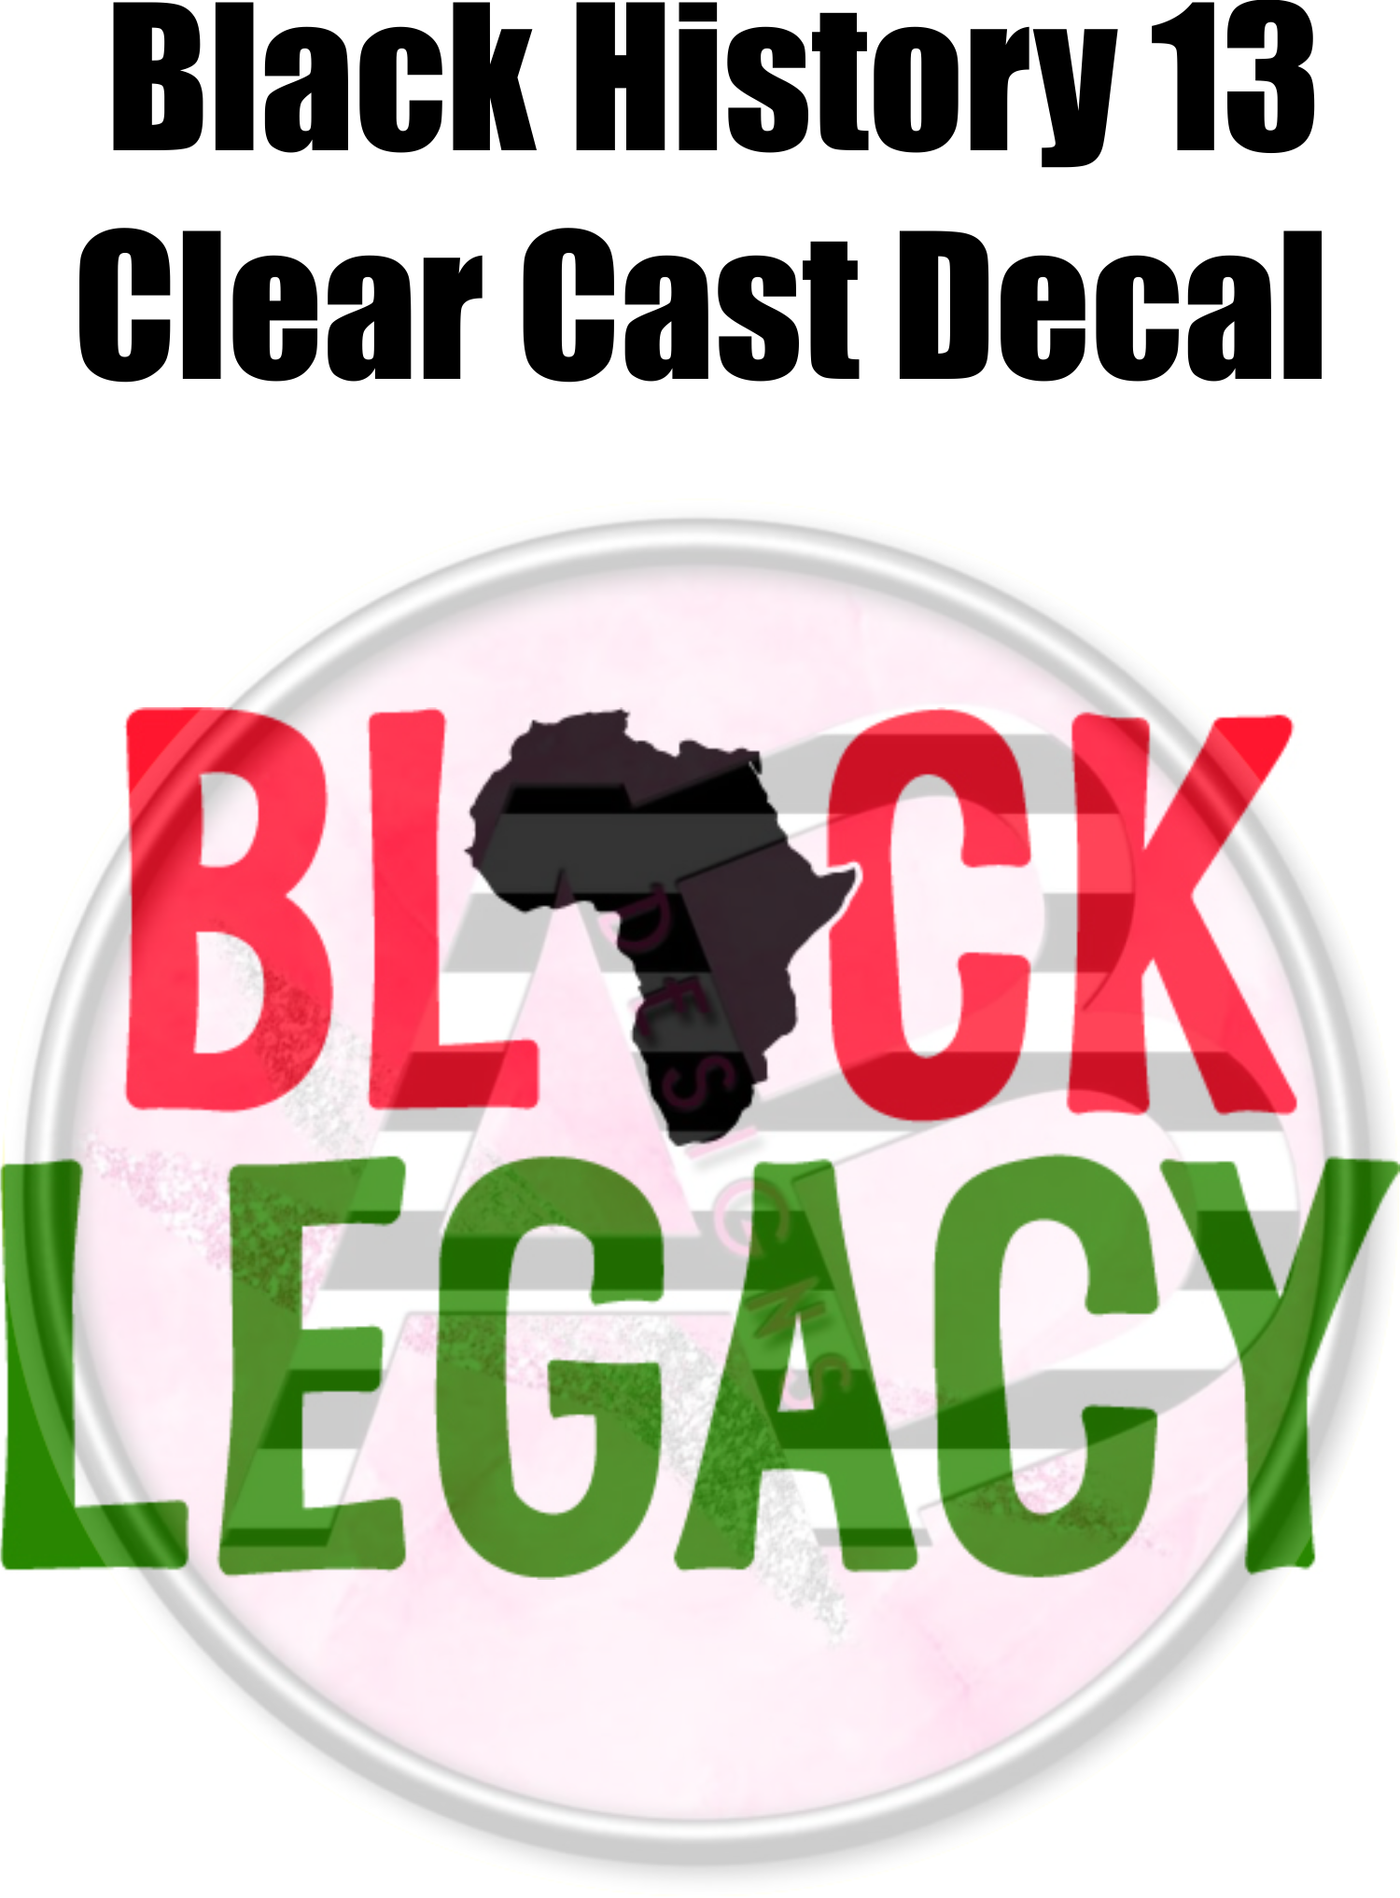 Black History 13 - Clear Cast Decal